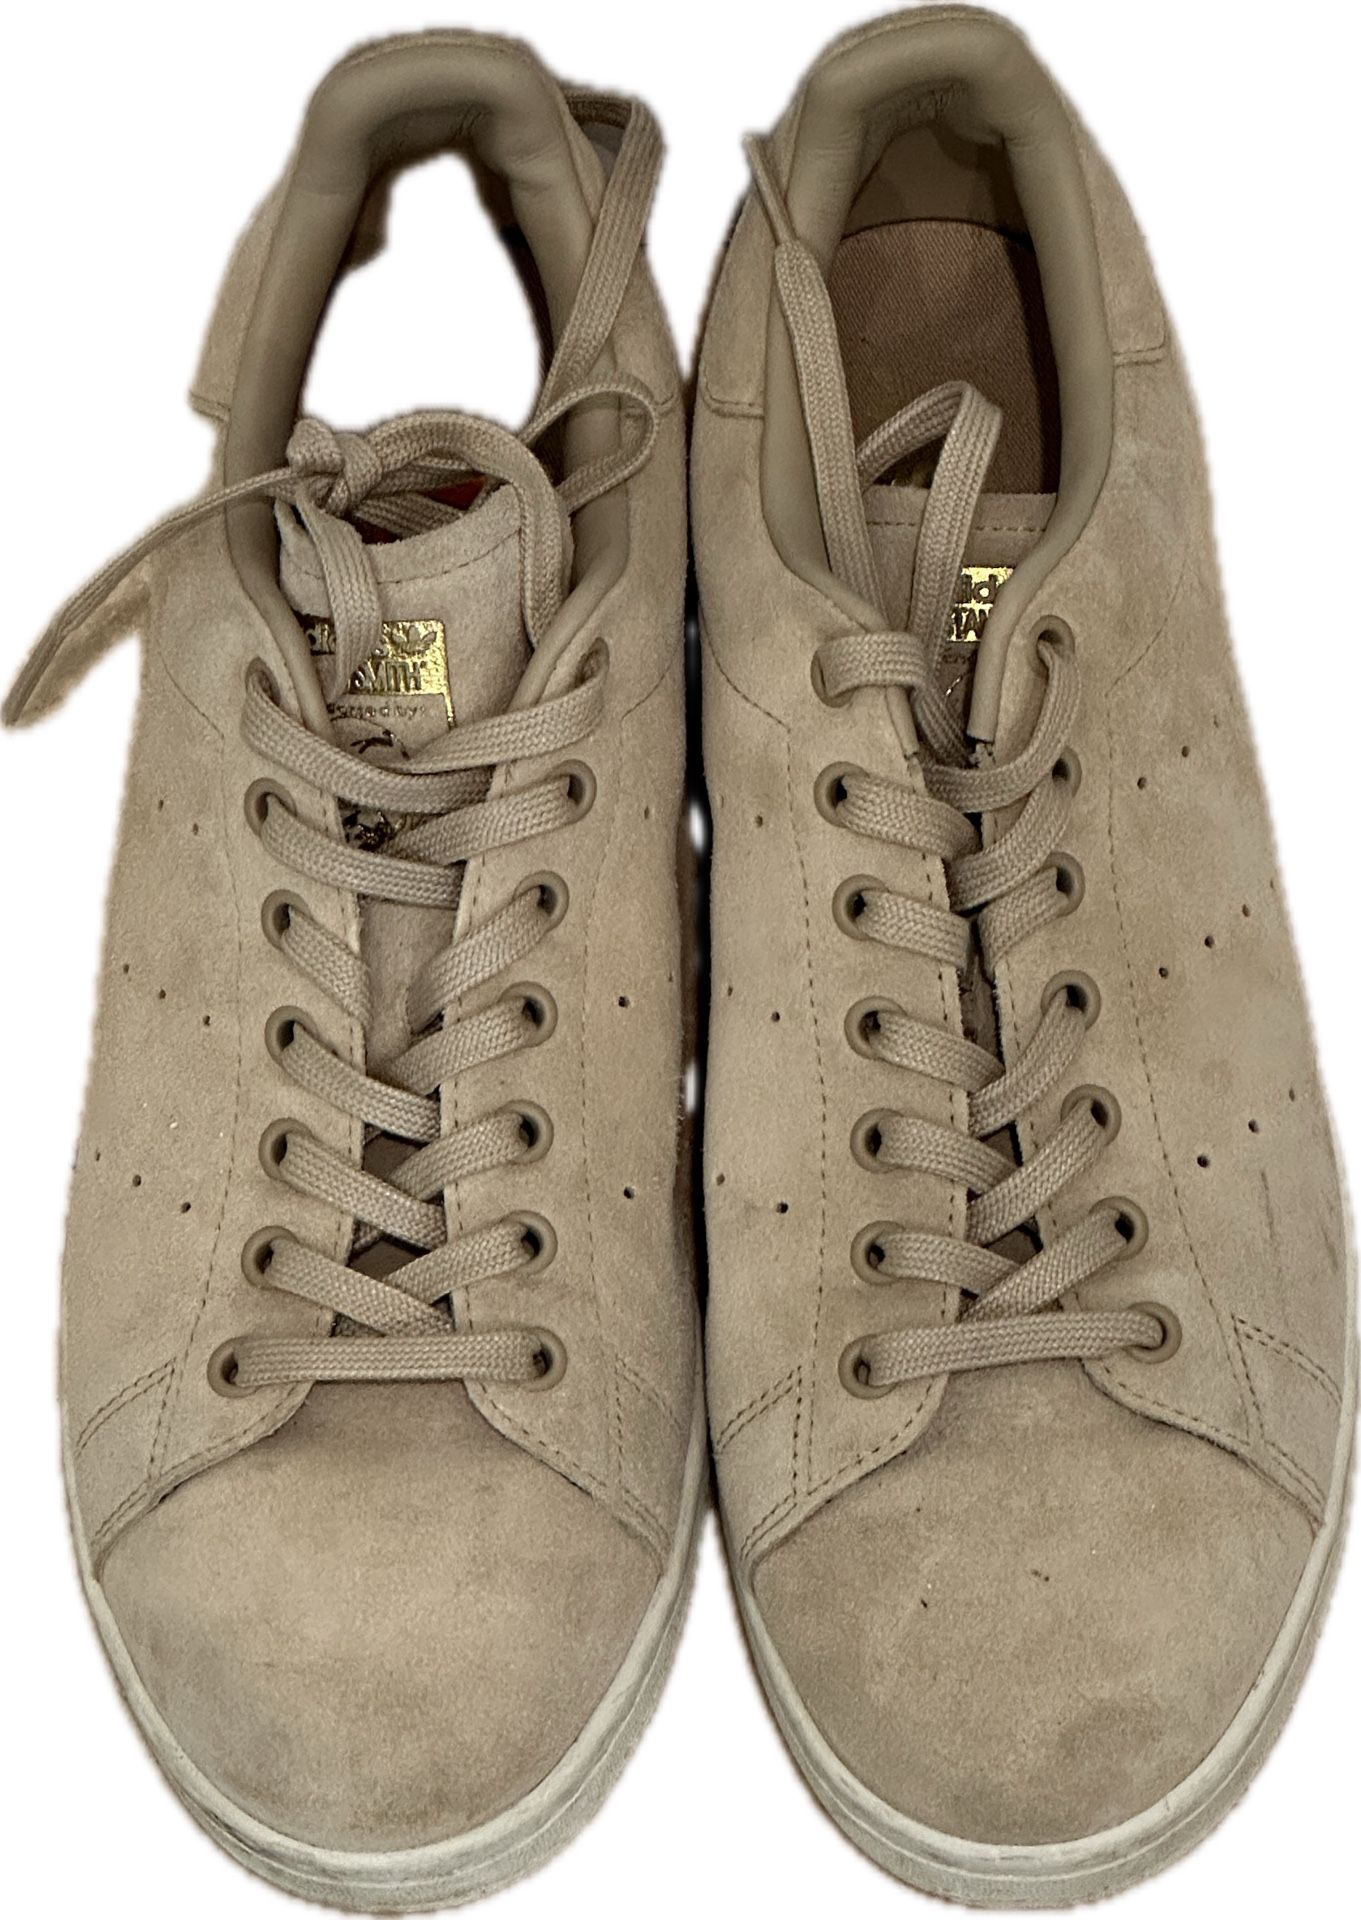 Stan Smith Adidas Tennis Shoes Sneakers Light Beige Suede Lace Men 11